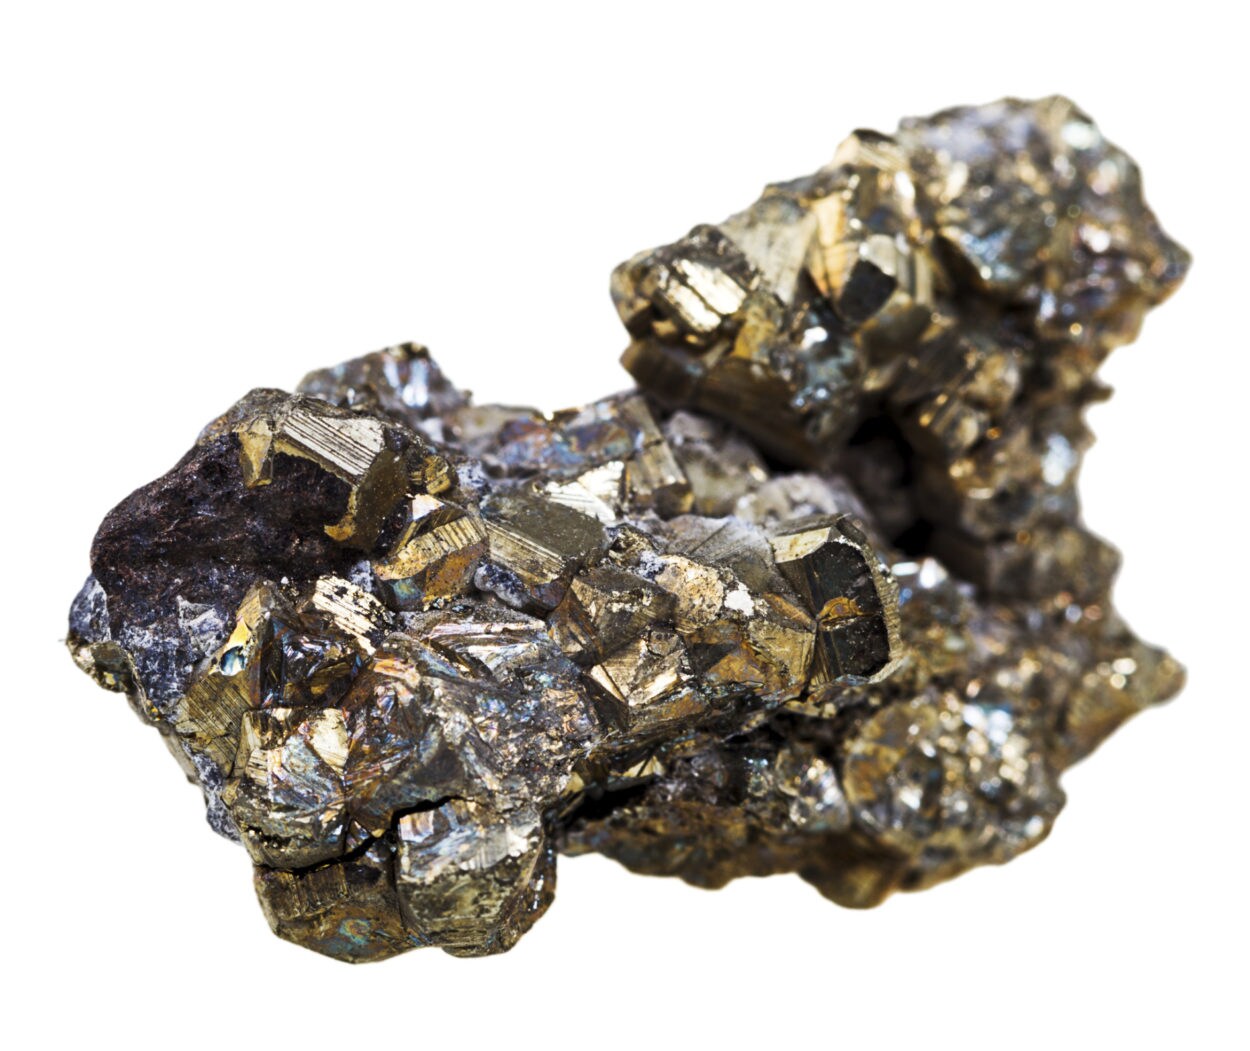 Pyrite The Real Story Behind “Fool’s Gold”